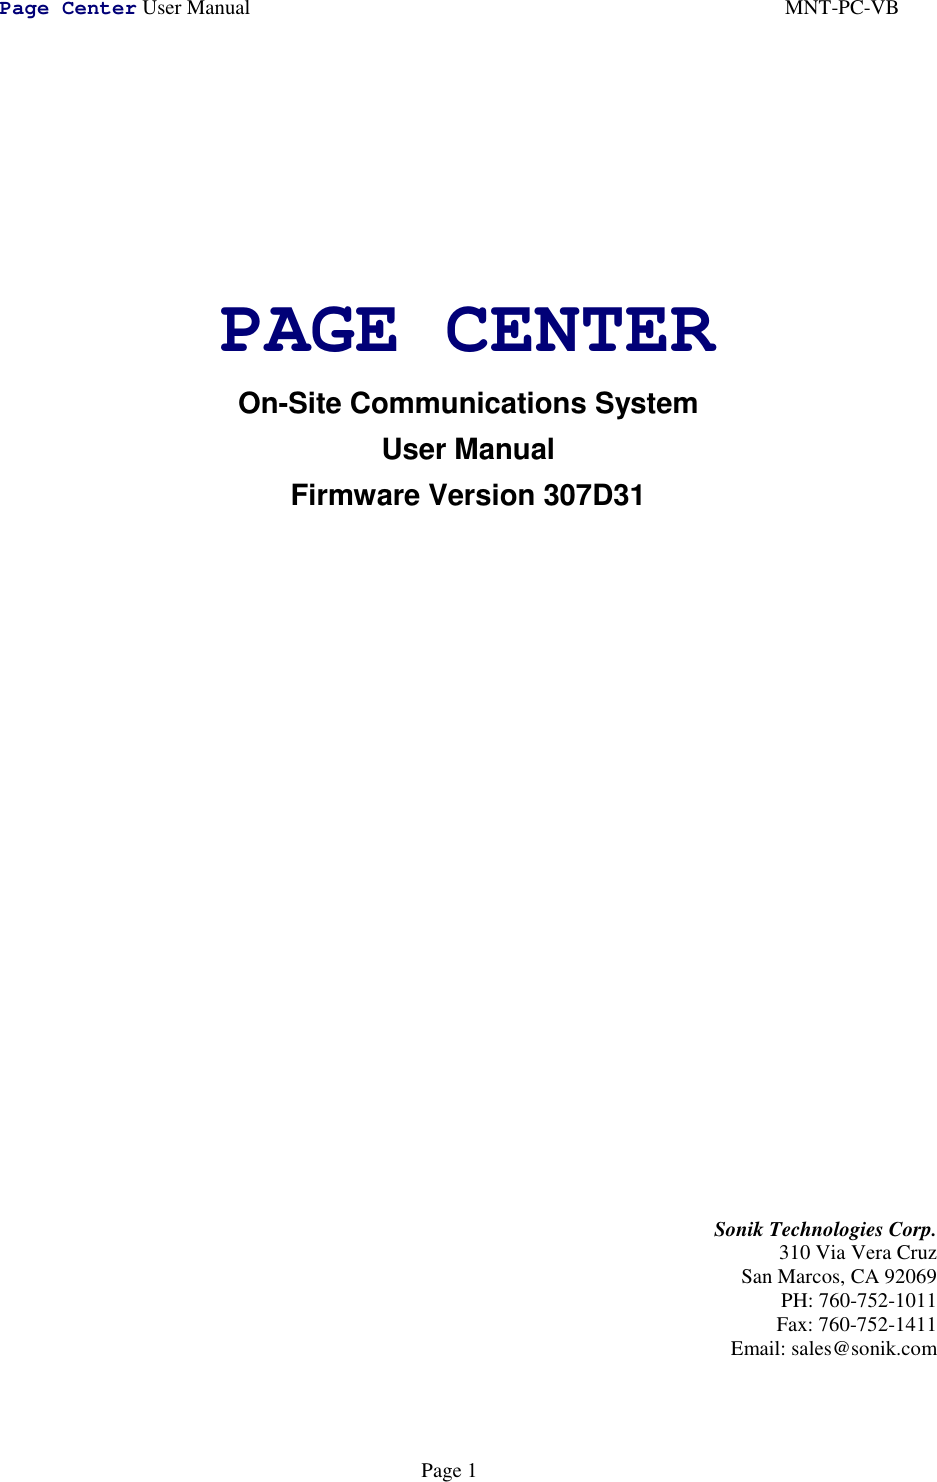 Page Center User Manual MNT-PC-VBPage 1PAGE CENTEROn-Site Communications SystemUser ManualFirmware Version 307D31Sonik Technologies Corp.310 Via Vera CruzSan Marcos, CA 92069PH: 760-752-1011Fax: 760-752-1411Email: sales@sonik.com